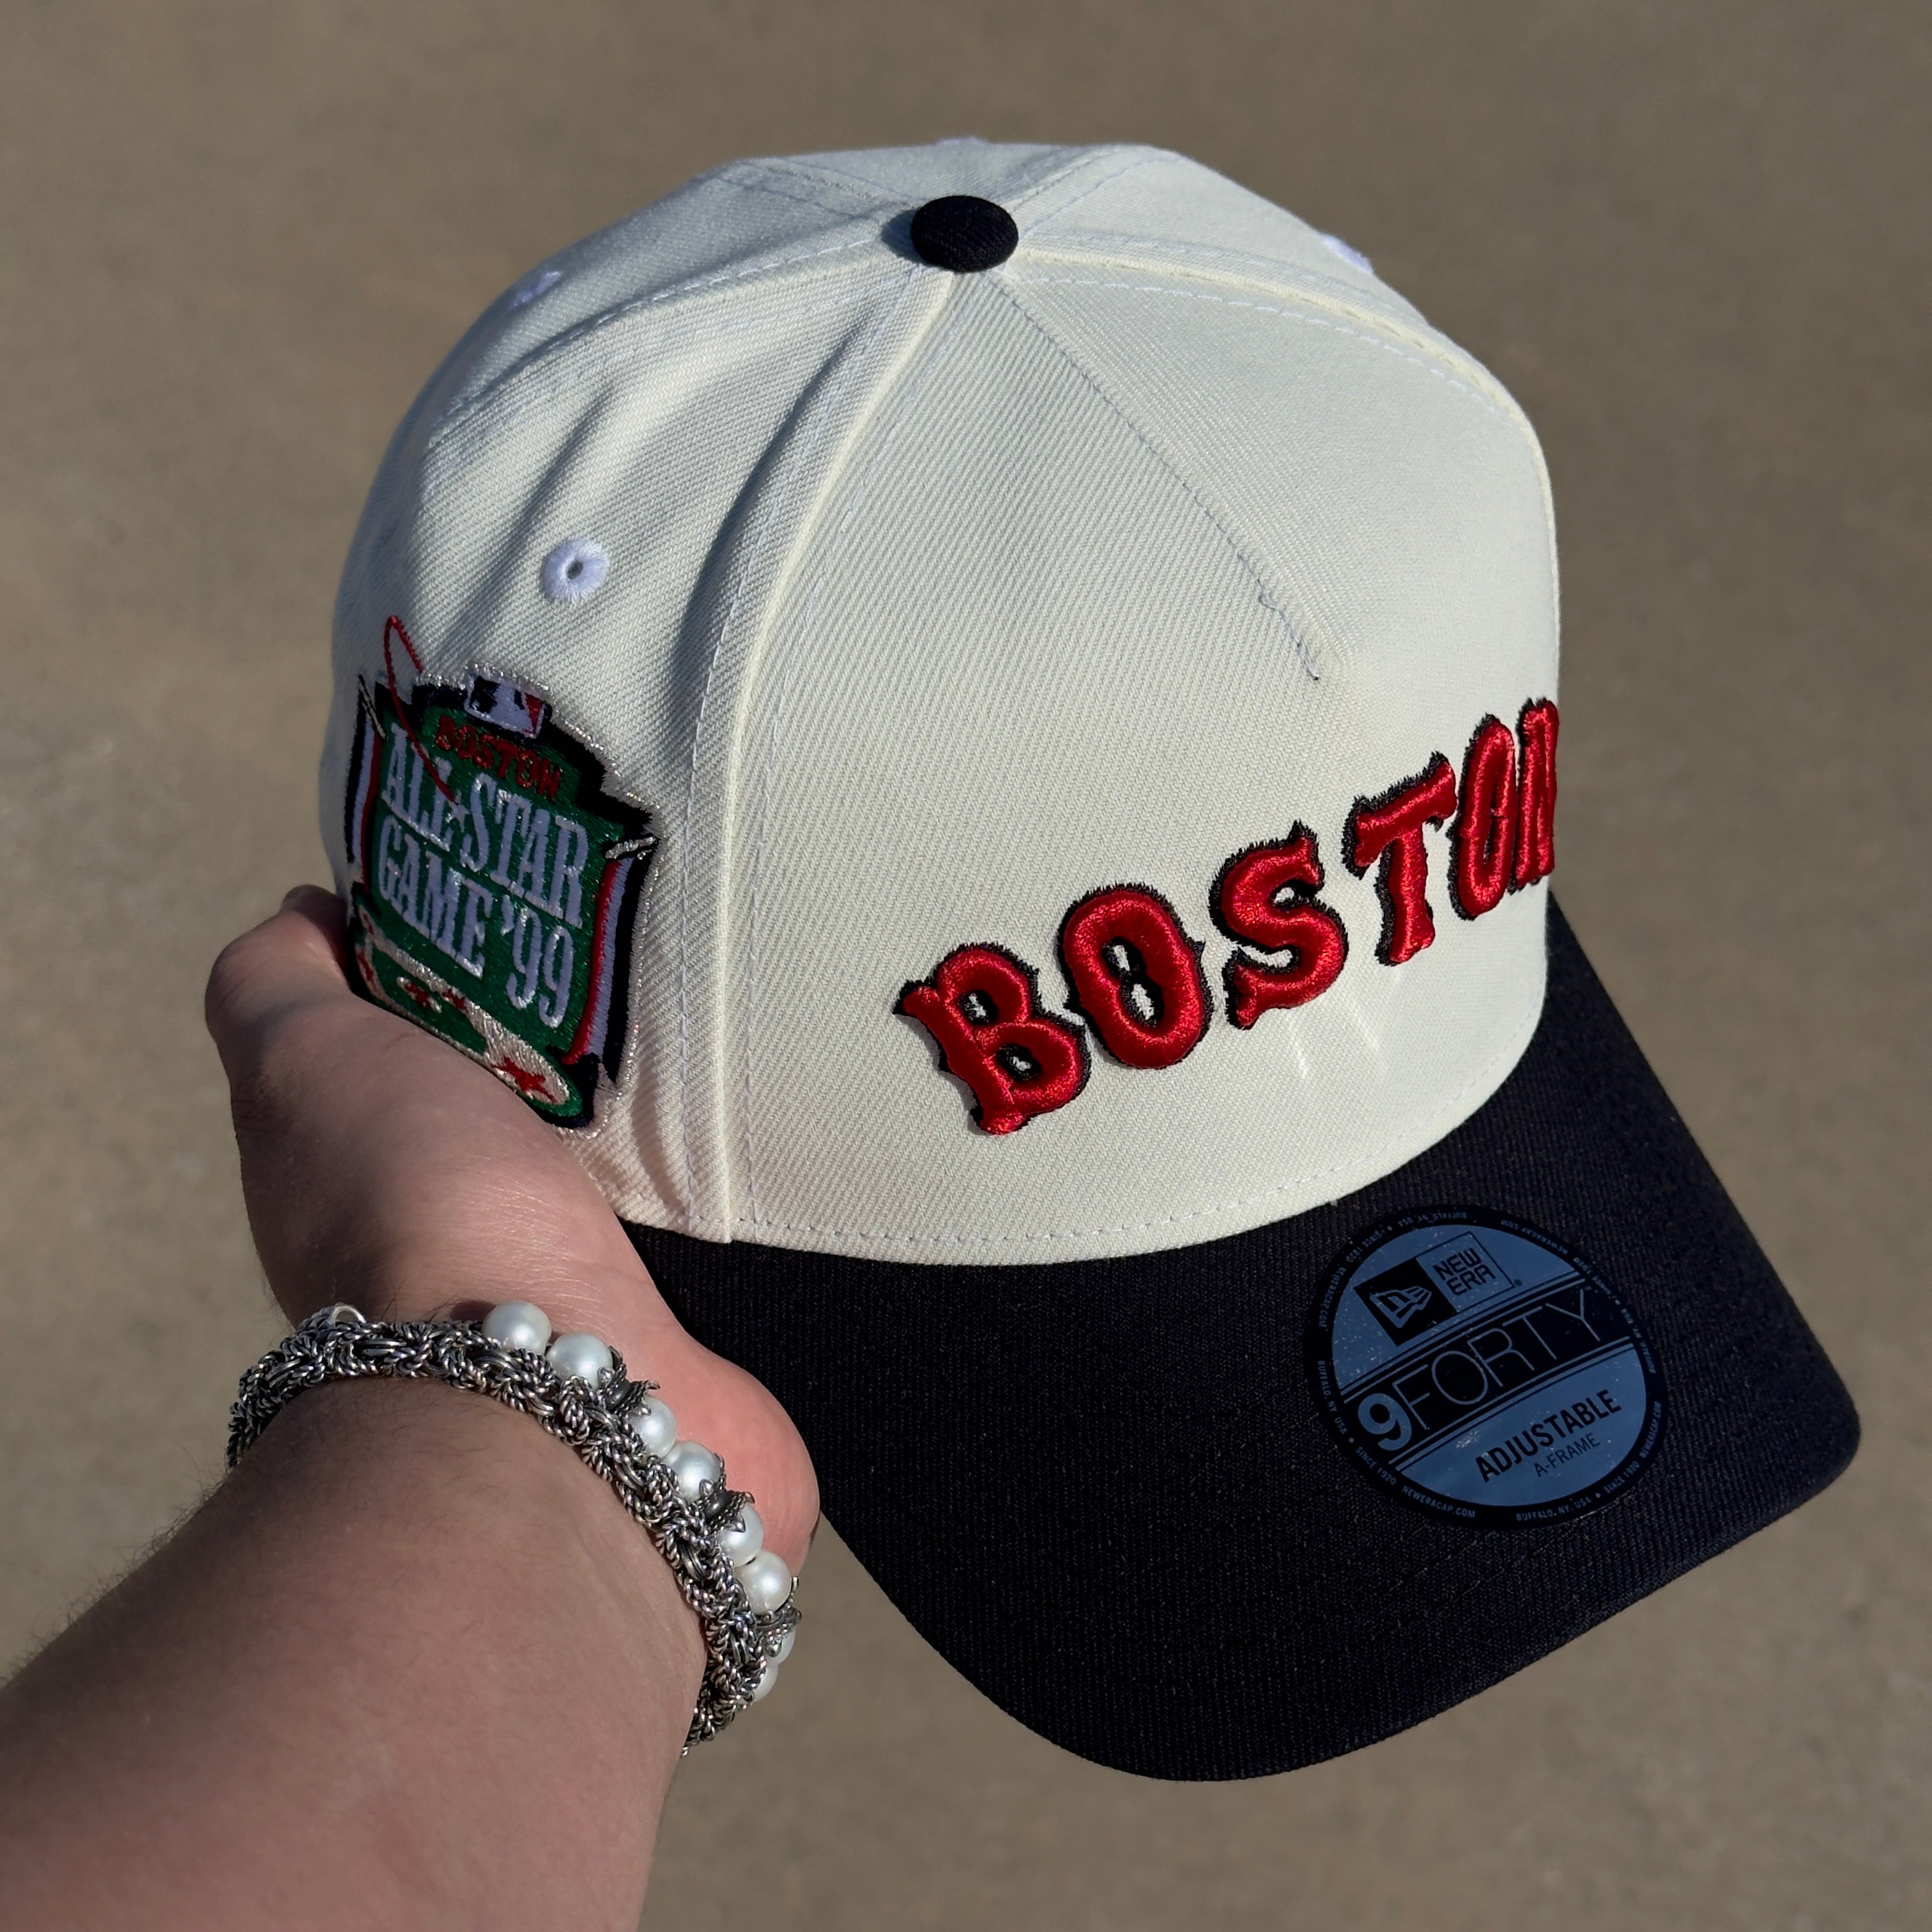 Chrome Boston White Sox All Star Game 99 New Era Adjustable One Size 9Forty Hat